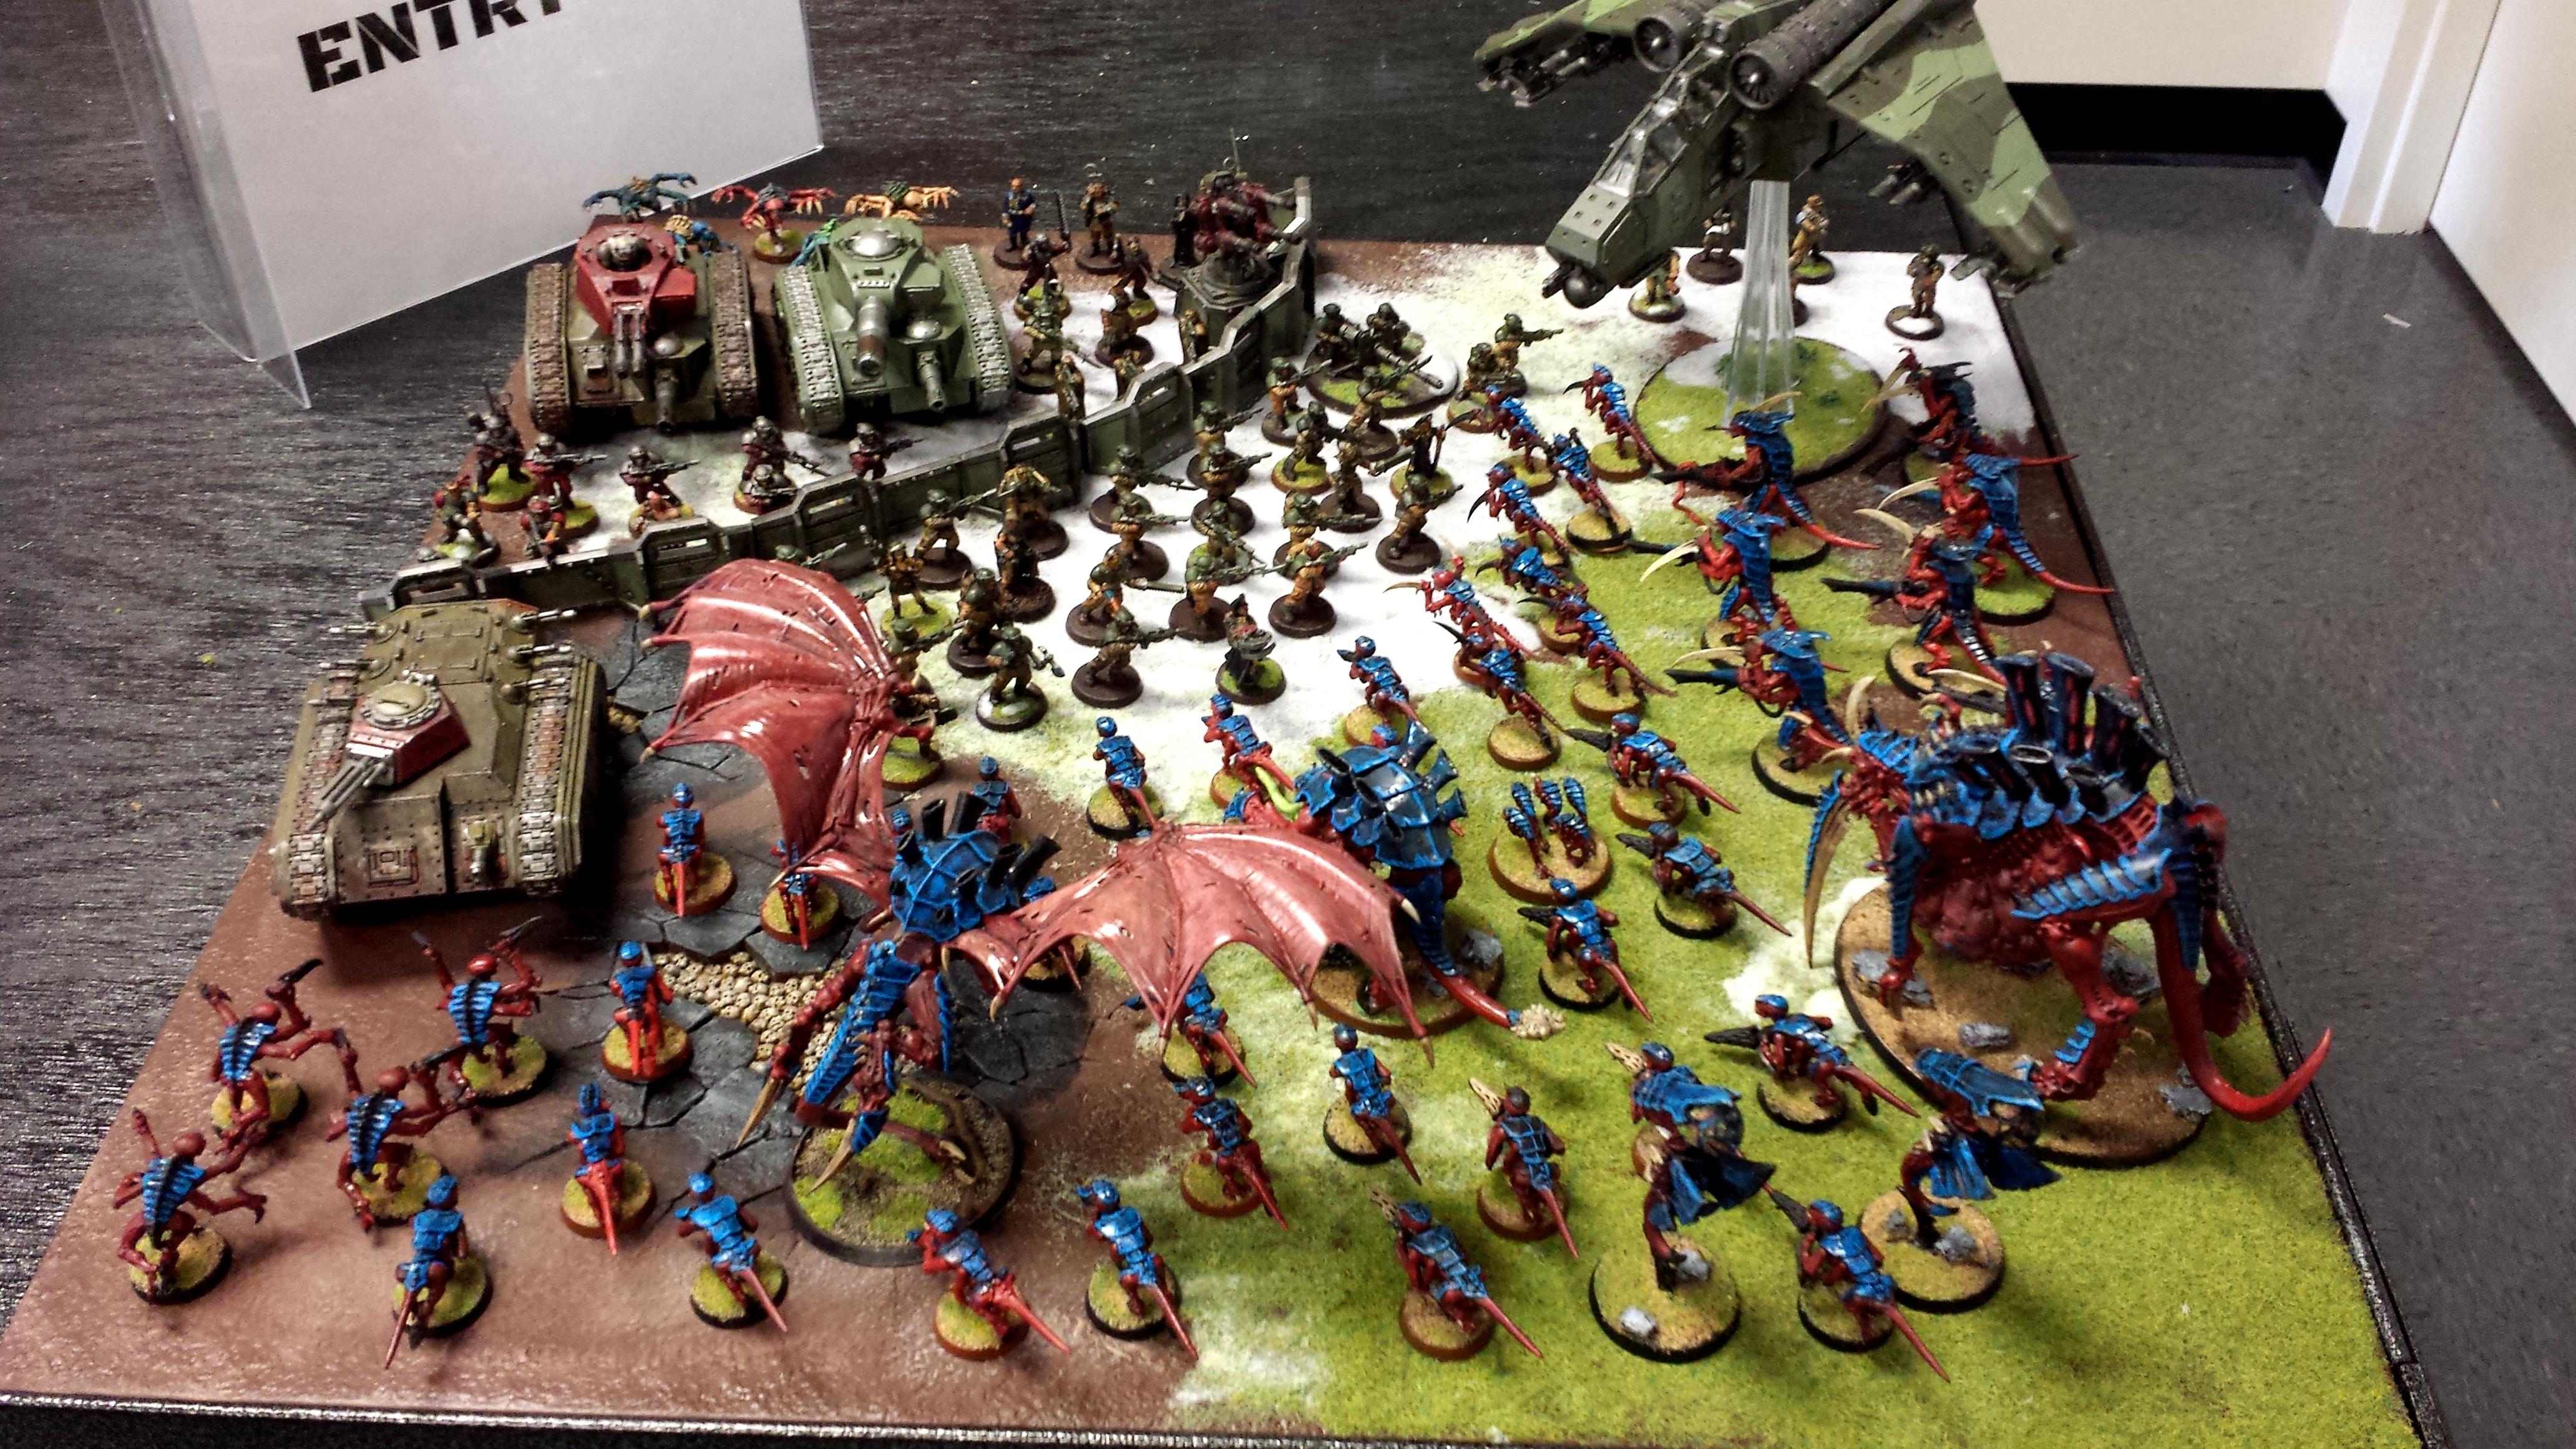 Armies On Parade, Imperial Guard, Tyranids, Warhammer 40,000 Armies